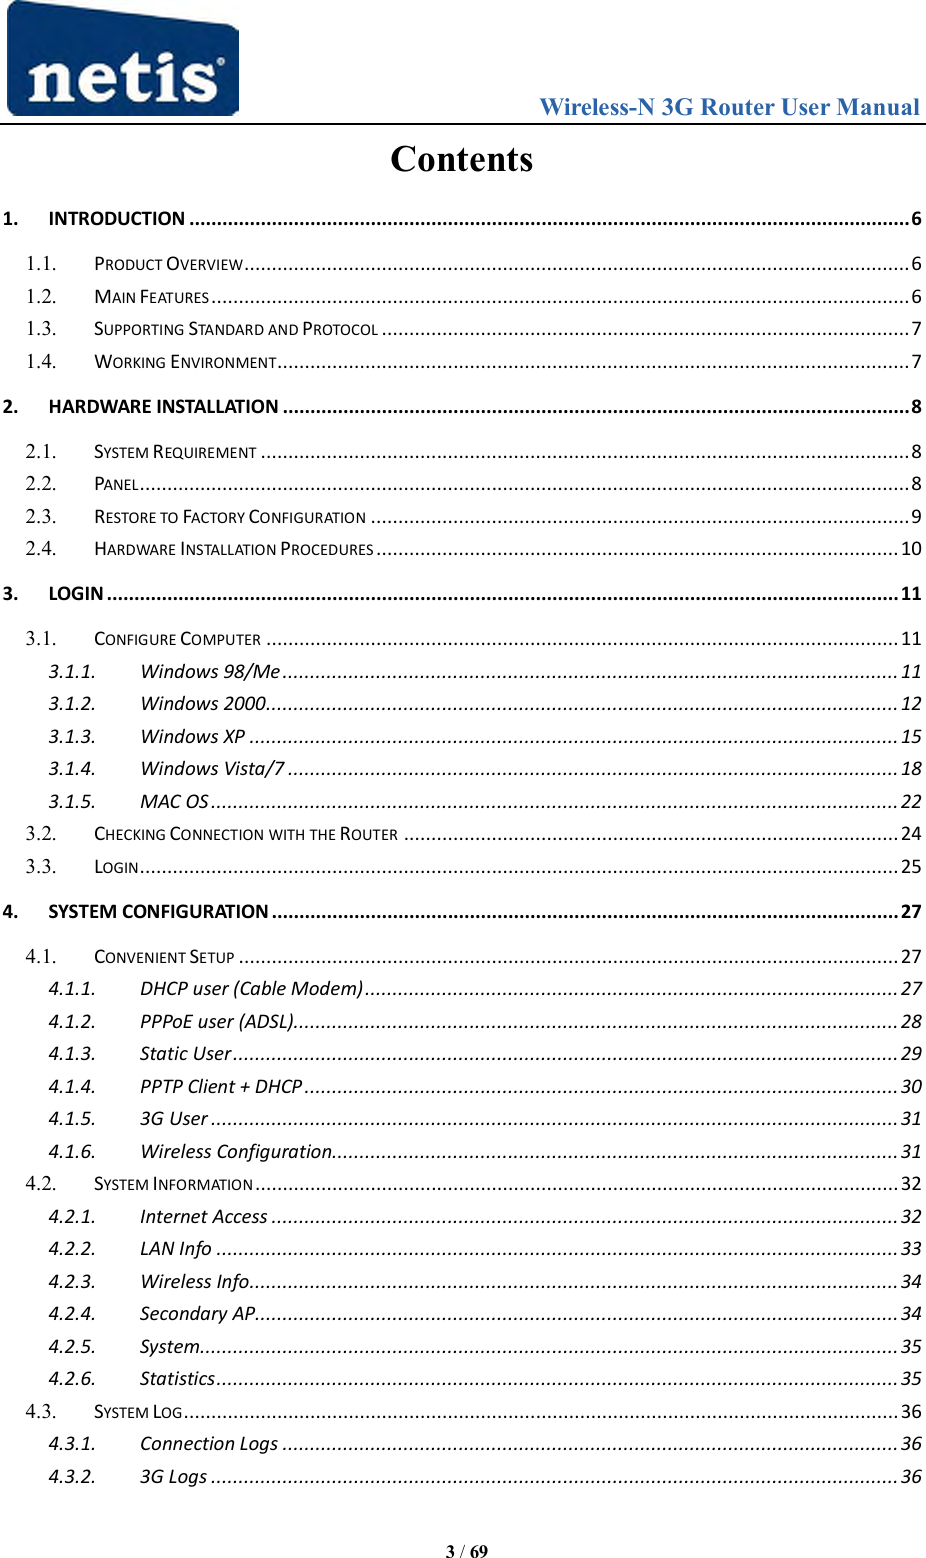                                 Wireless-N 3G Router User Manual  3 / 69 Contents 1. INTRODUCTION ................................................................................................................................... 6 1.1. PRODUCT OVERVIEW ......................................................................................................................... 6 1.2. MAIN FEATURES ............................................................................................................................... 6 1.3. SUPPORTING STANDARD AND PROTOCOL ................................................................................................ 7 1.4. WORKING ENVIRONMENT................................................................................................................... 7 2. HARDWARE INSTALLATION .................................................................................................................. 8 2.1. SYSTEM REQUIREMENT ...................................................................................................................... 8 2.2. PANEL ............................................................................................................................................ 8 2.3. RESTORE TO FACTORY CONFIGURATION .................................................................................................. 9 2.4. HARDWARE INSTALLATION PROCEDURES ............................................................................................... 10 3. LOGIN ................................................................................................................................................ 11 3.1. CONFIGURE COMPUTER ................................................................................................................... 11 3.1.1. Windows 98/Me ................................................................................................................ 11 3.1.2. Windows 2000 ................................................................................................................... 12 3.1.3. Windows XP ...................................................................................................................... 15 3.1.4. Windows Vista/7 ............................................................................................................... 18 3.1.5. MAC OS ............................................................................................................................. 22 3.2. CHECKING CONNECTION WITH THE ROUTER .......................................................................................... 24 3.3. LOGIN .......................................................................................................................................... 25 4. SYSTEM CONFIGURATION .................................................................................................................. 27 4.1. CONVENIENT SETUP ........................................................................................................................ 27 4.1.1. DHCP user (Cable Modem) ................................................................................................. 27 4.1.2. PPPoE user (ADSL).............................................................................................................. 28 4.1.3. Static User ......................................................................................................................... 29 4.1.4. PPTP Client + DHCP ............................................................................................................ 30 4.1.5. 3G User ............................................................................................................................. 31 4.1.6. Wireless Configuration....................................................................................................... 31 4.2. SYSTEM INFORMATION ..................................................................................................................... 32 4.2.1. Internet Access .................................................................................................................. 32 4.2.2. LAN Info ............................................................................................................................ 33 4.2.3. Wireless Info ...................................................................................................................... 34 4.2.4. Secondary AP..................................................................................................................... 34 4.2.5. System ............................................................................................................................... 35 4.2.6. Statistics ............................................................................................................................ 35 4.3. SYSTEM LOG .................................................................................................................................. 36 4.3.1. Connection Logs ................................................................................................................ 36 4.3.2. 3G Logs ............................................................................................................................. 36 